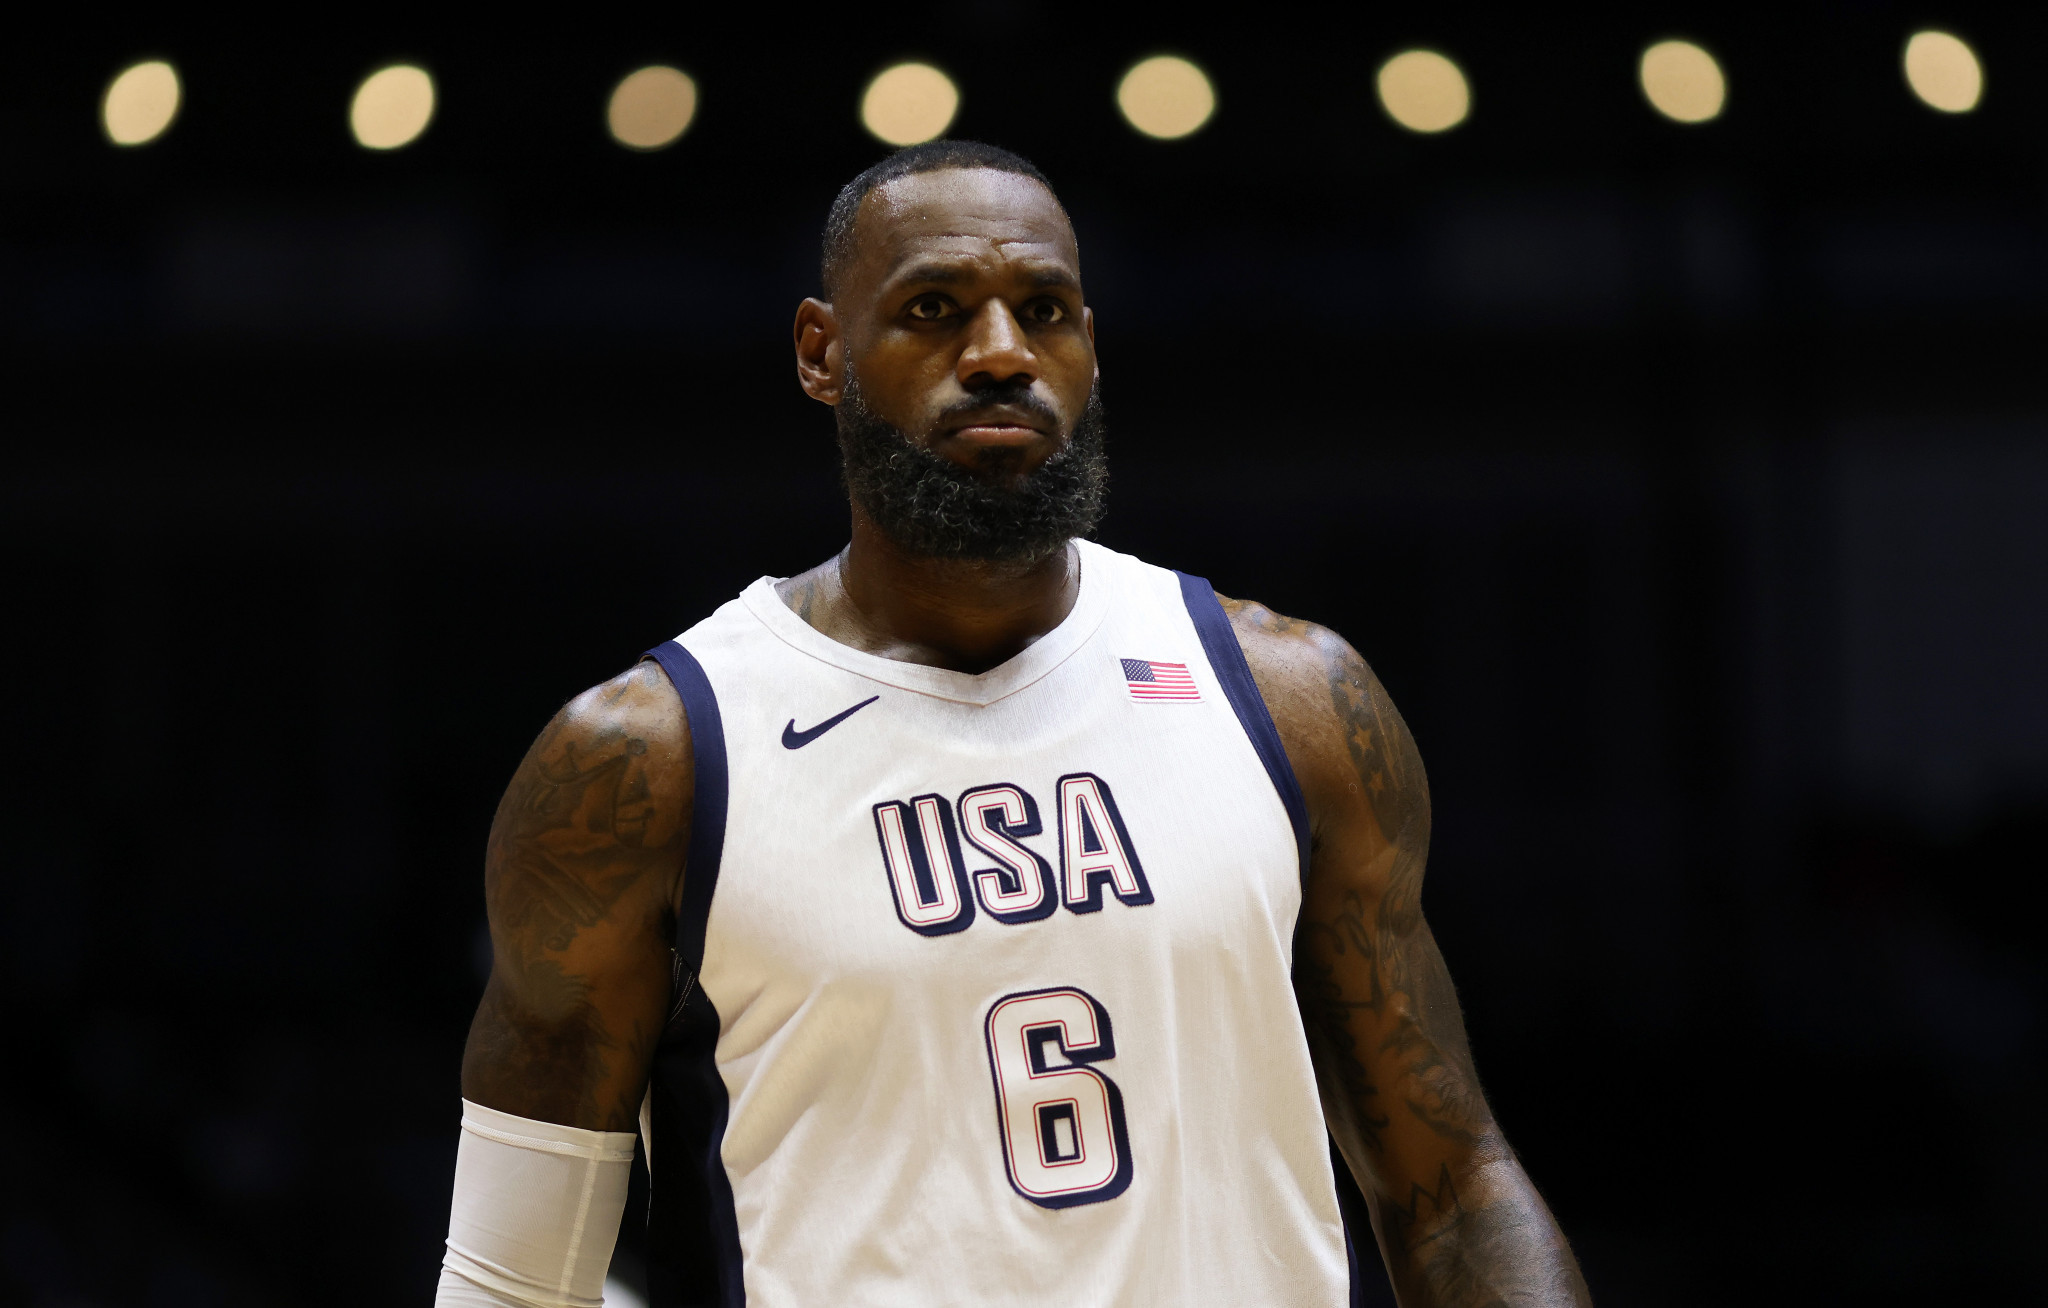 LeBron James will be joined by Coco Gauff in being a Team USA flag bearer. GETTY IMAGES